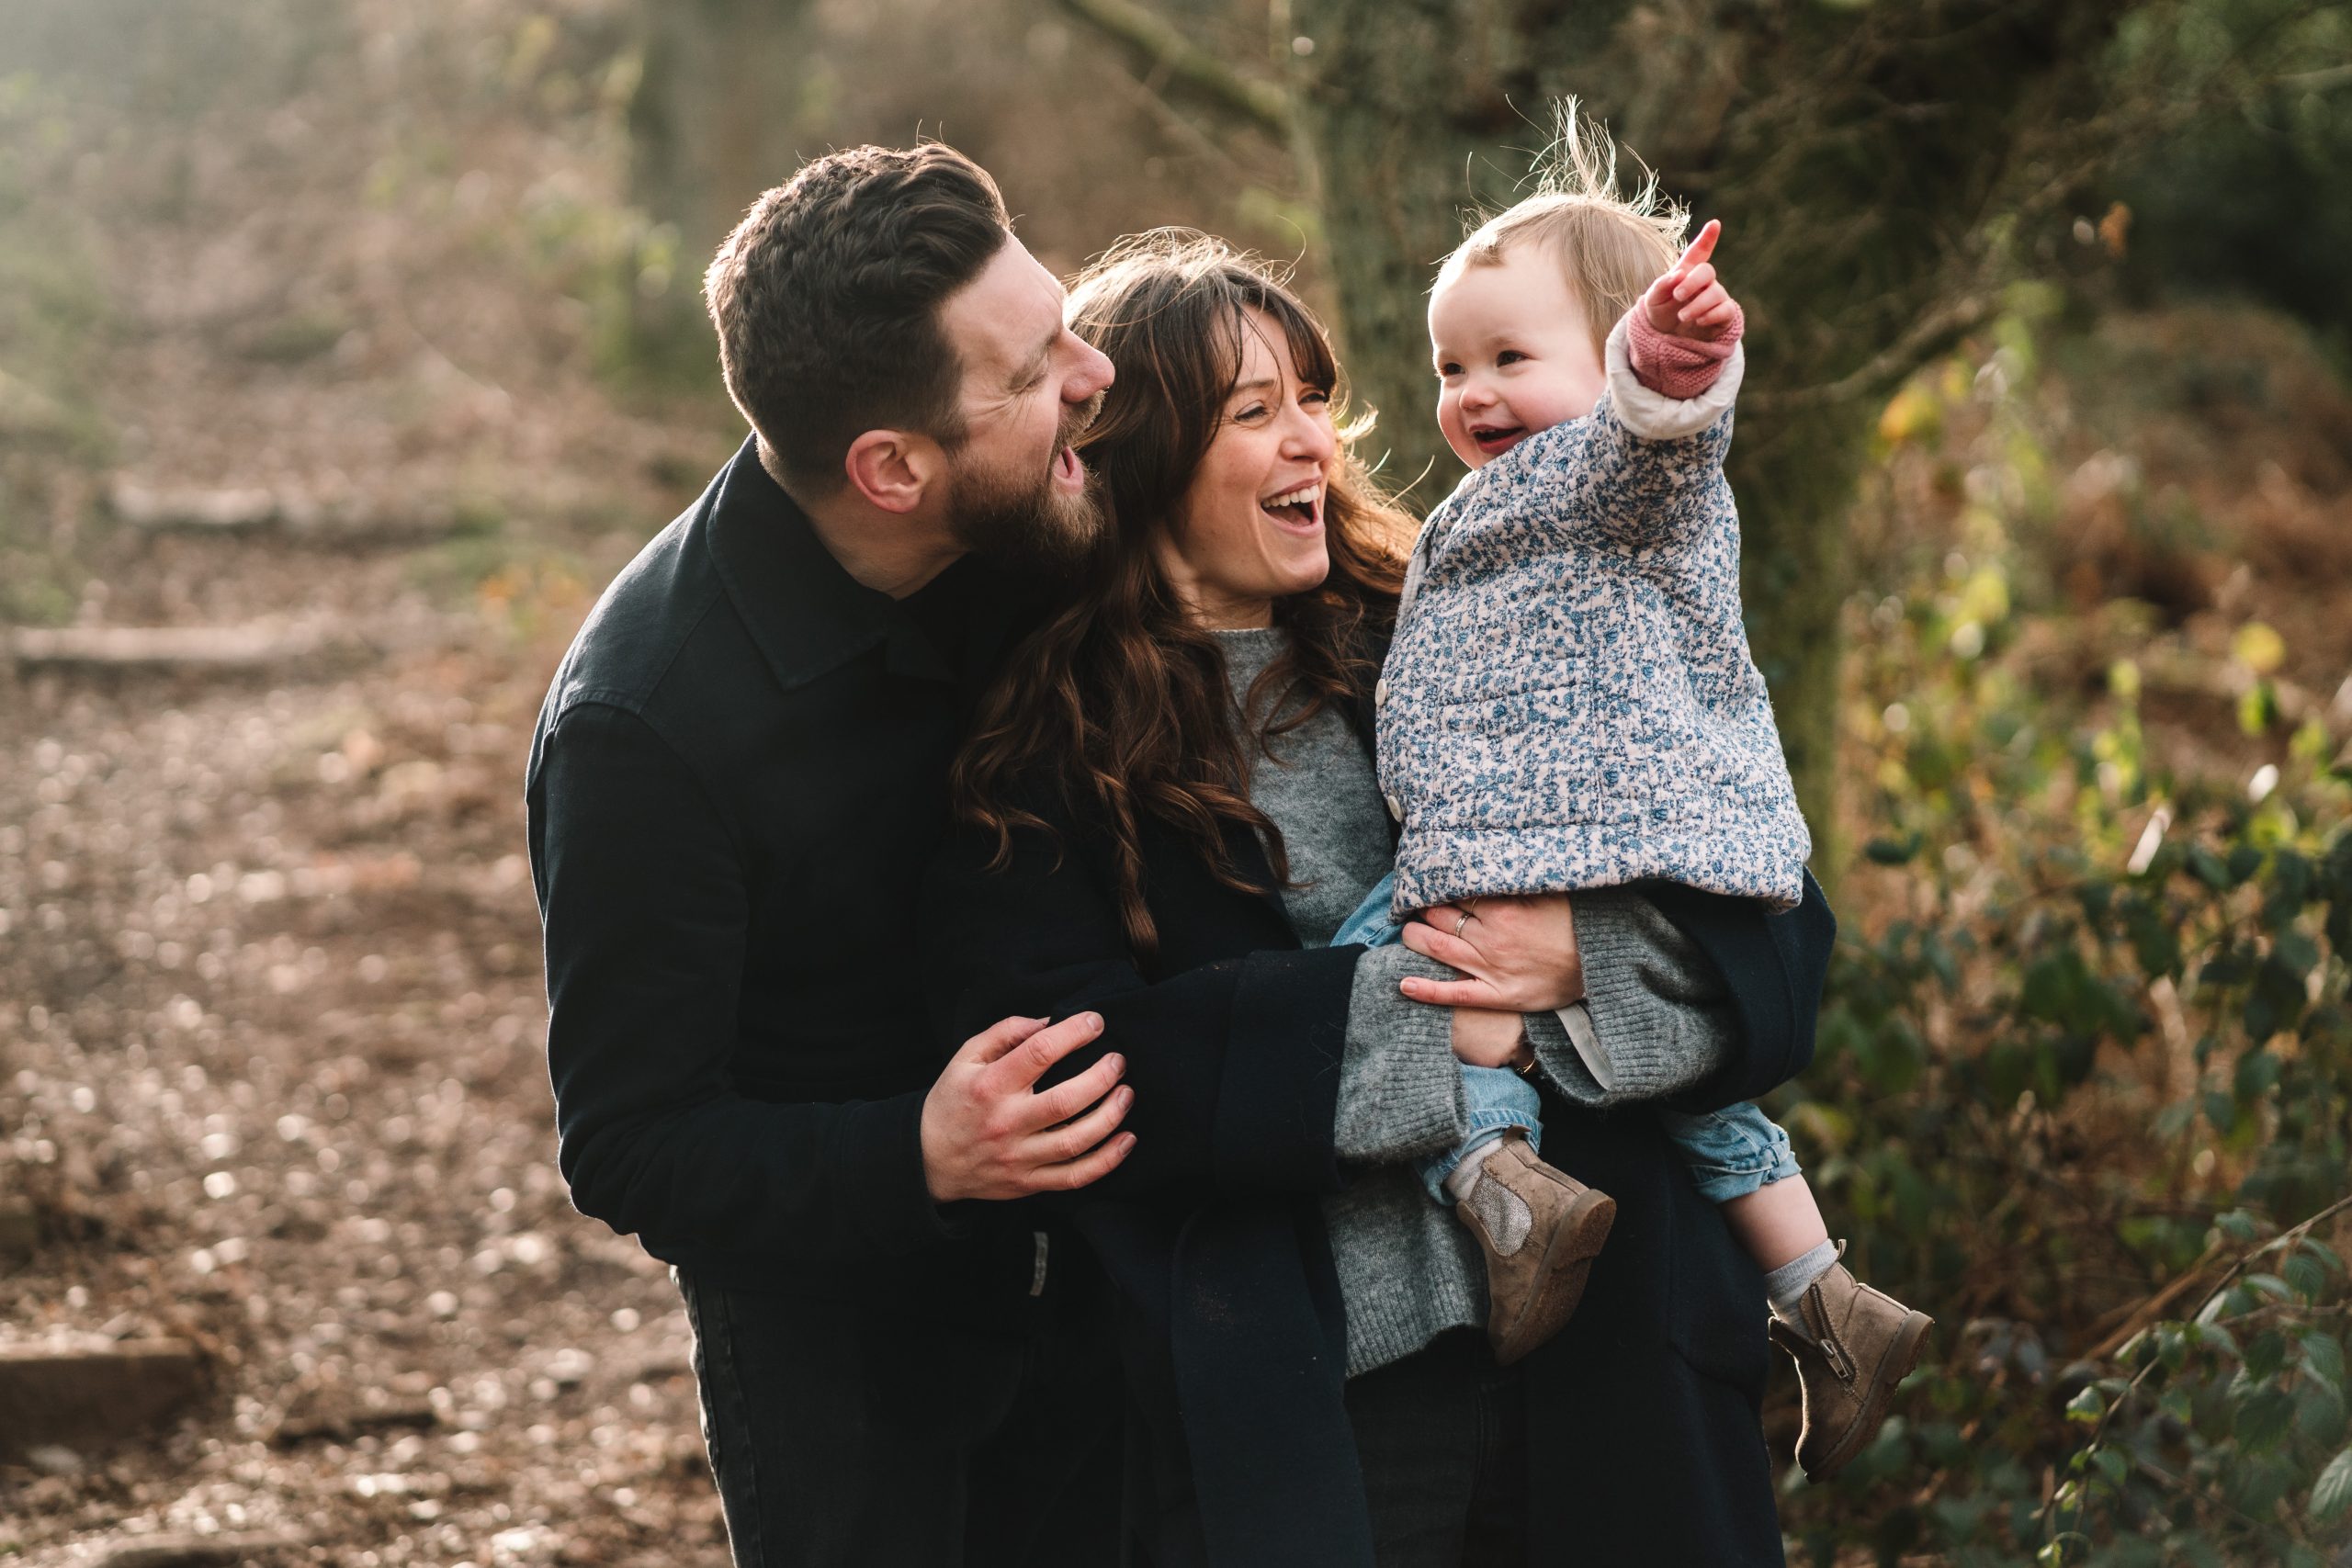 Mum and dad cuddling their 2 year old daughter out in the woods on a family shoot